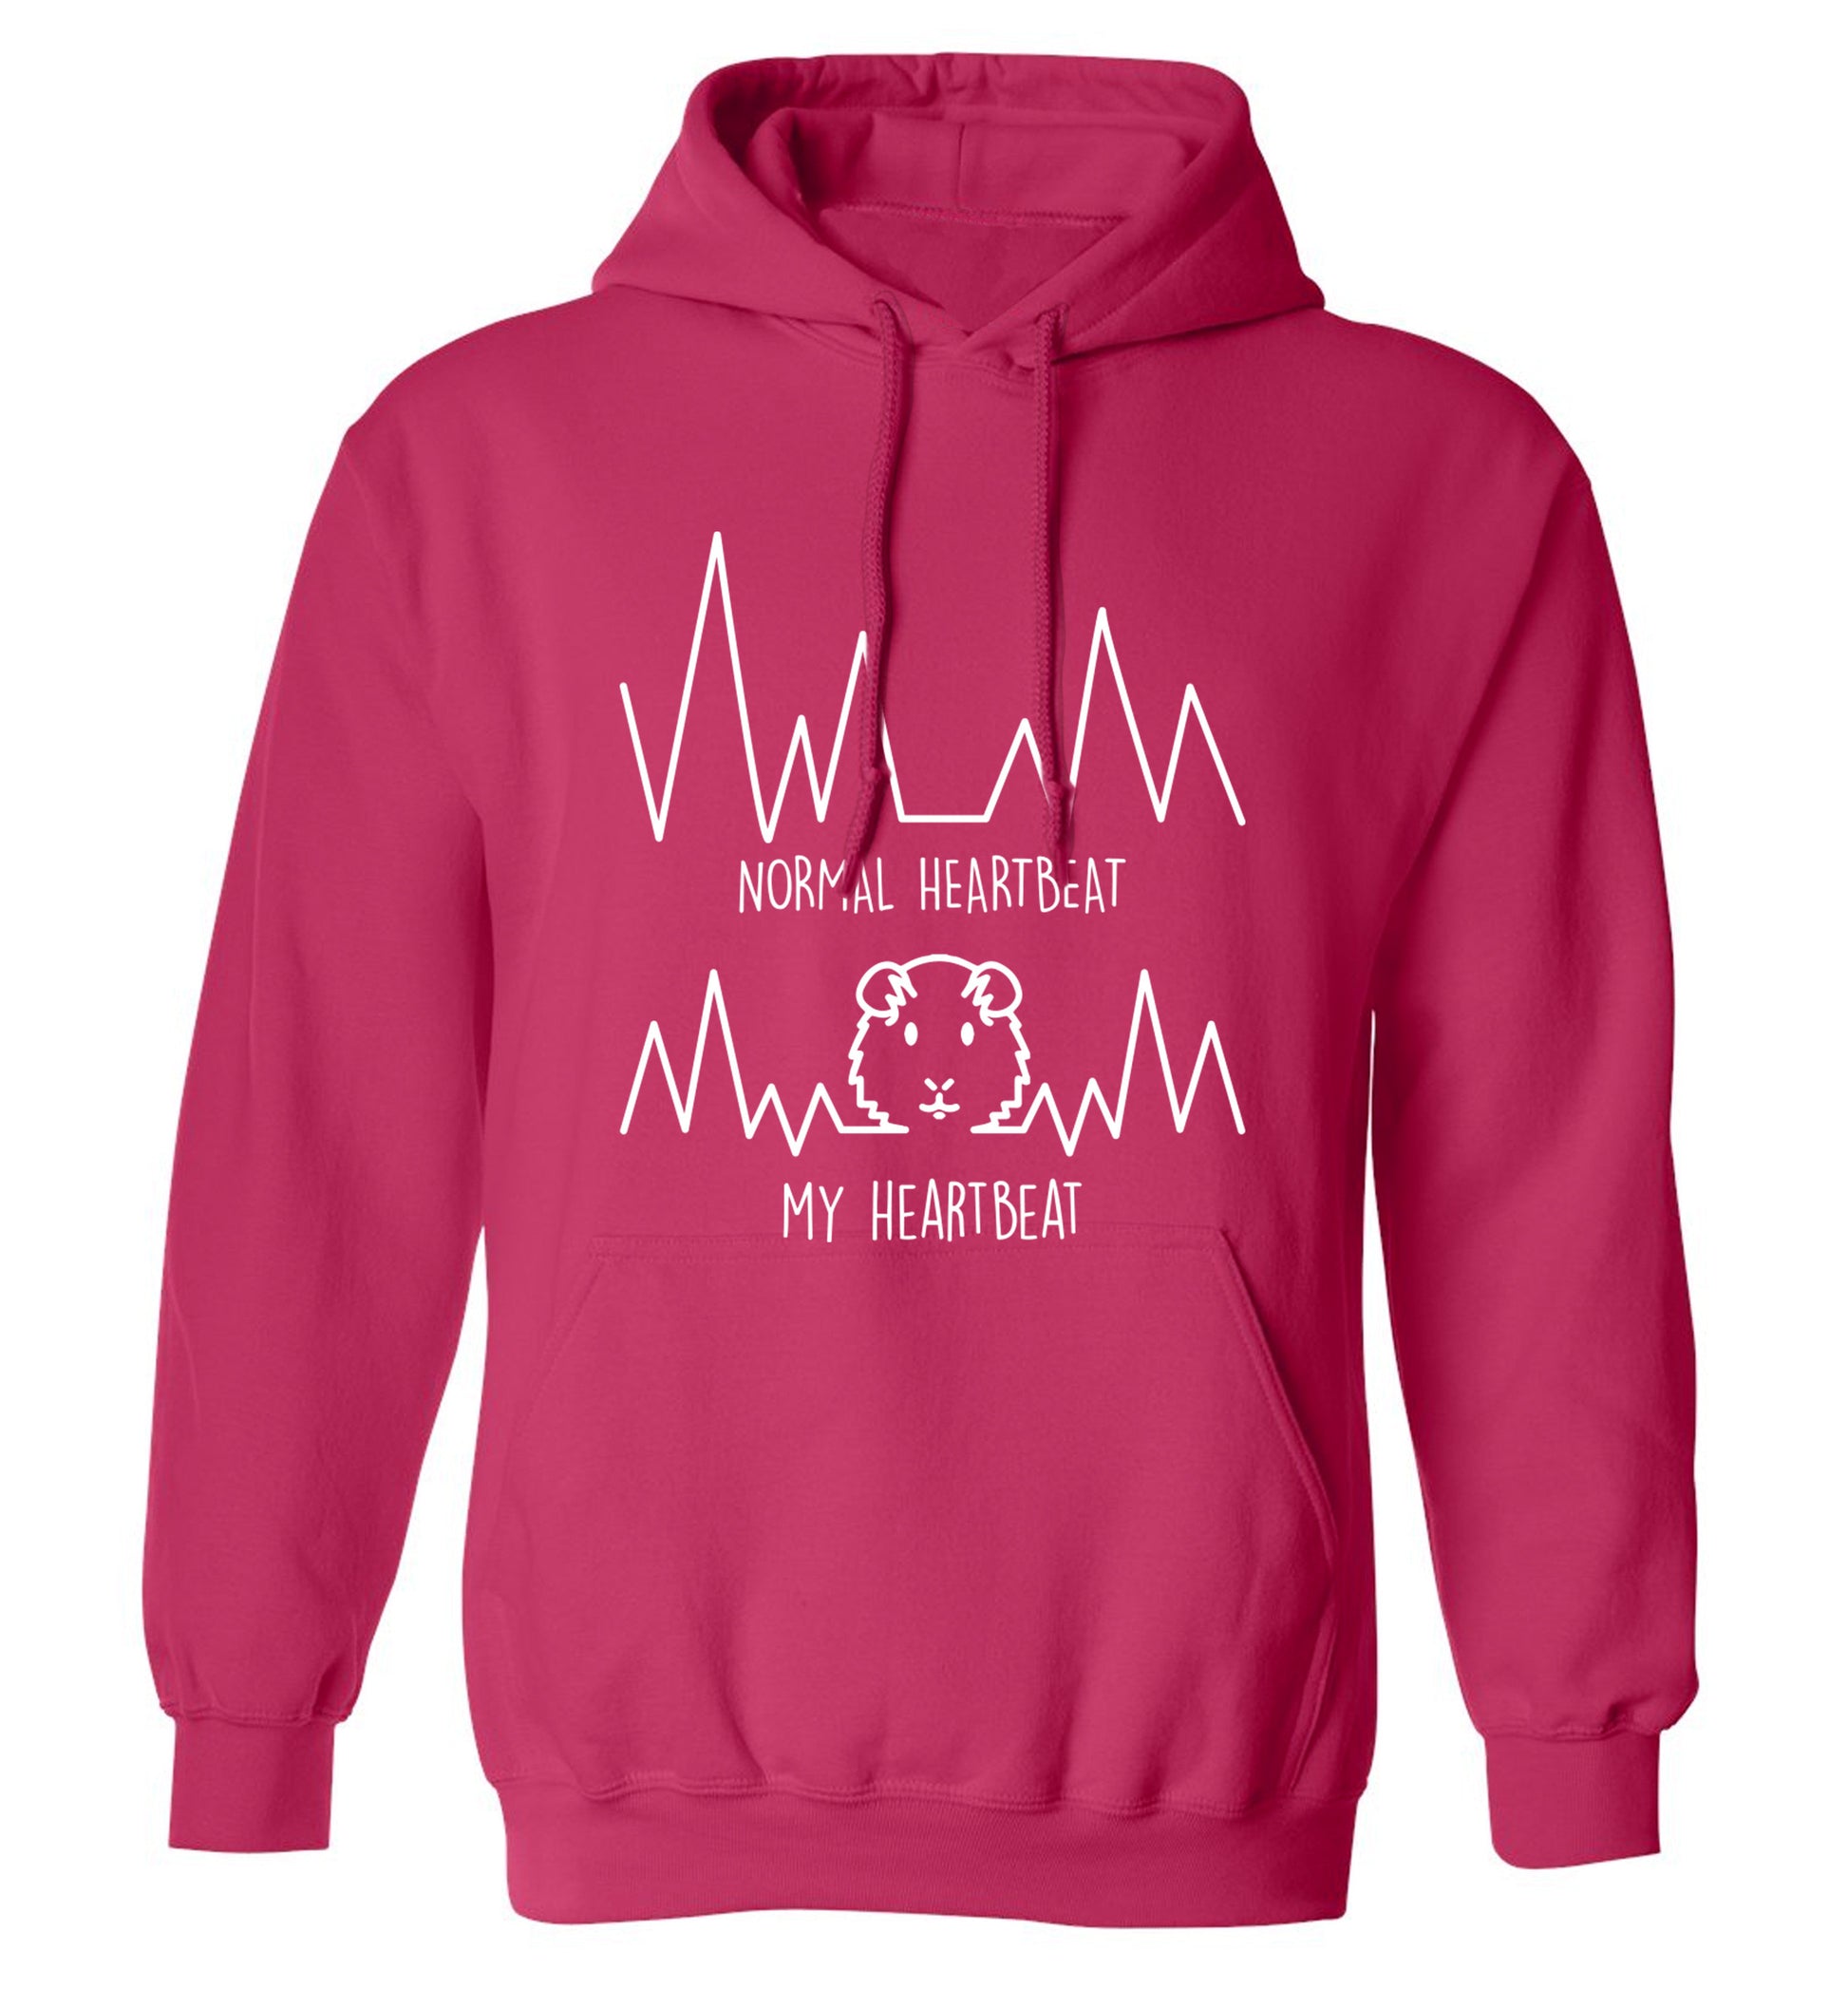 Normal heartbeat vs my heartbeat guinea pig lover adults unisex pink hoodie 2XL